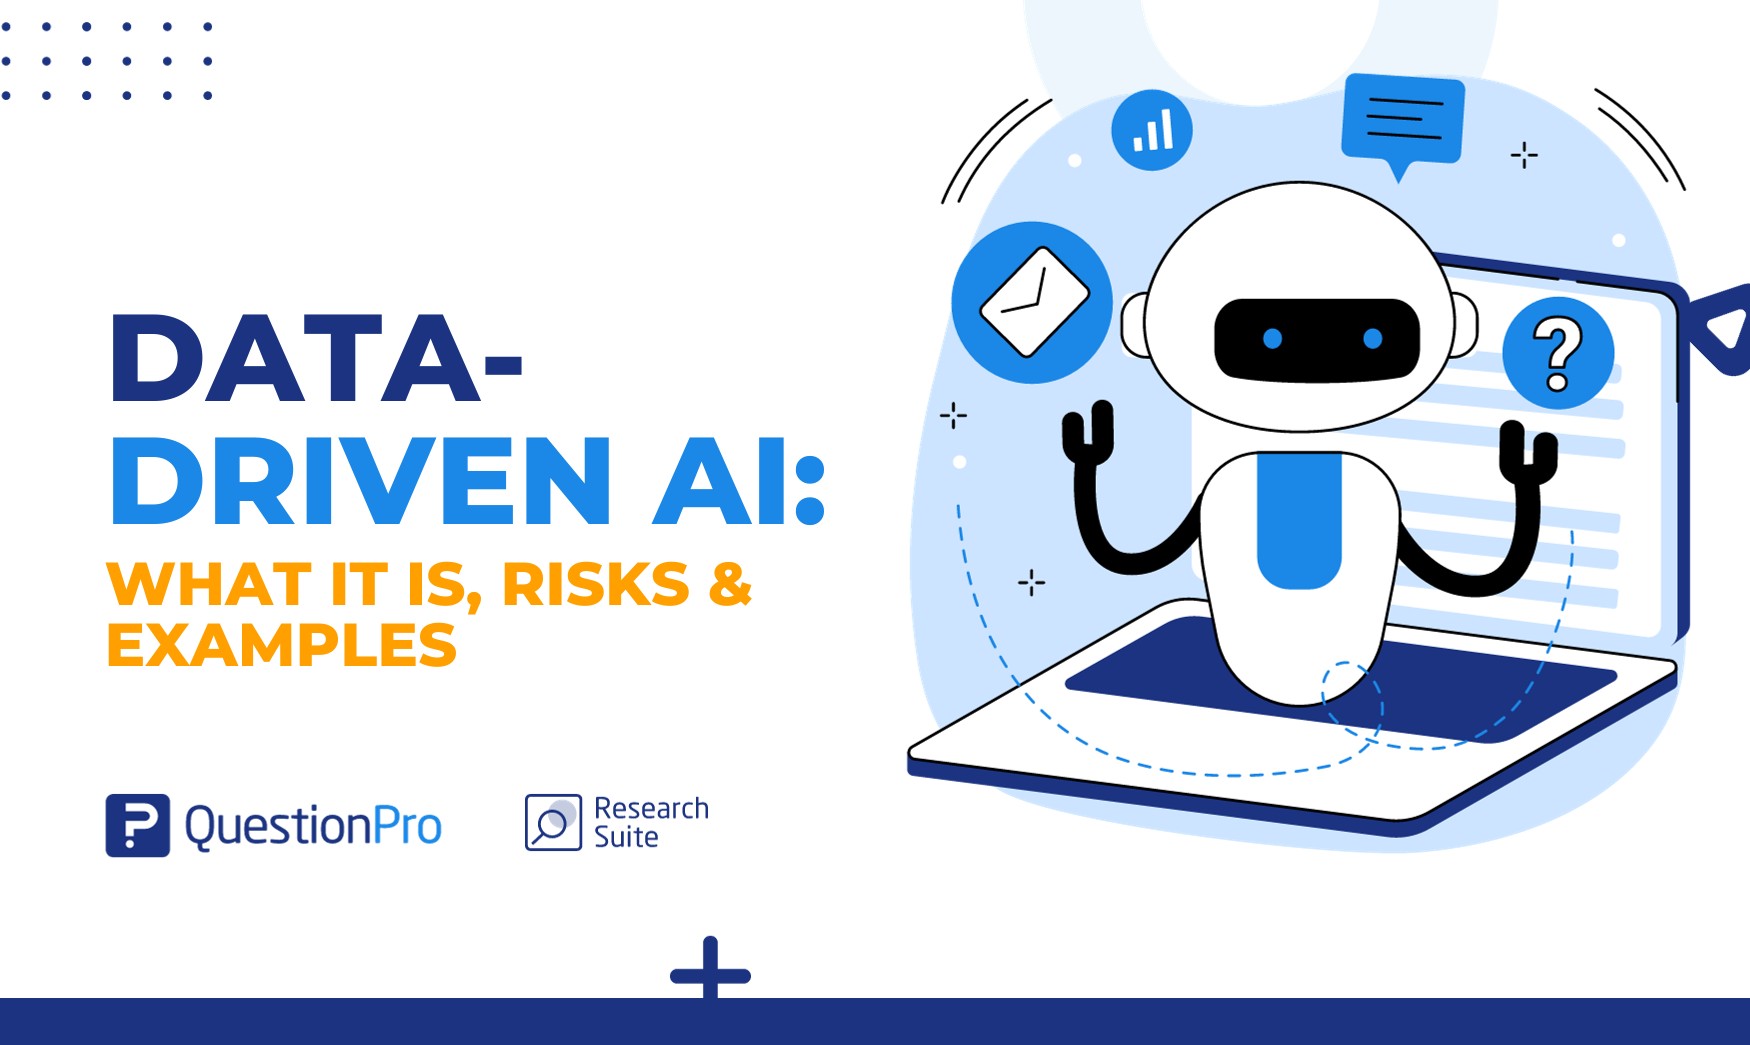 Data-driven AI is about learning from data. It's the practice of developing AI models that make decisions, predictions, or recommendations.